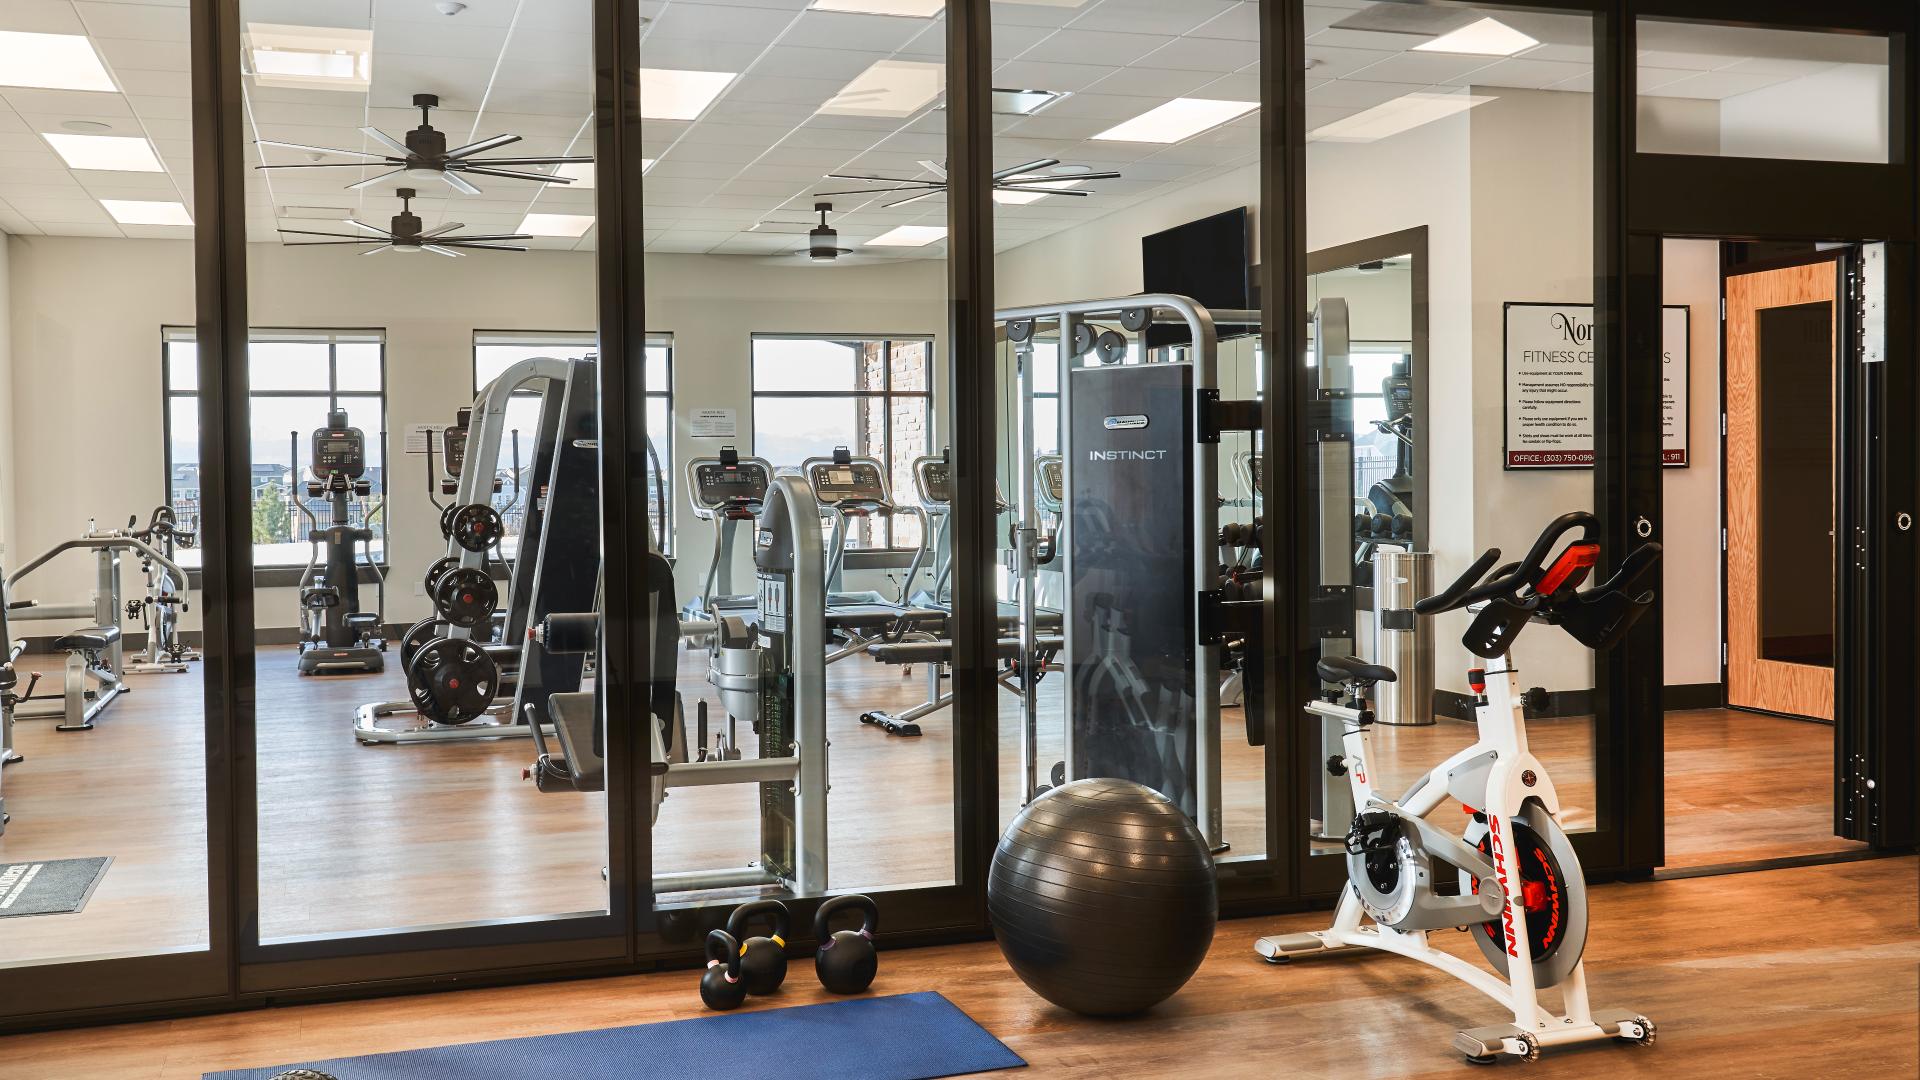 Amenity center fitness space